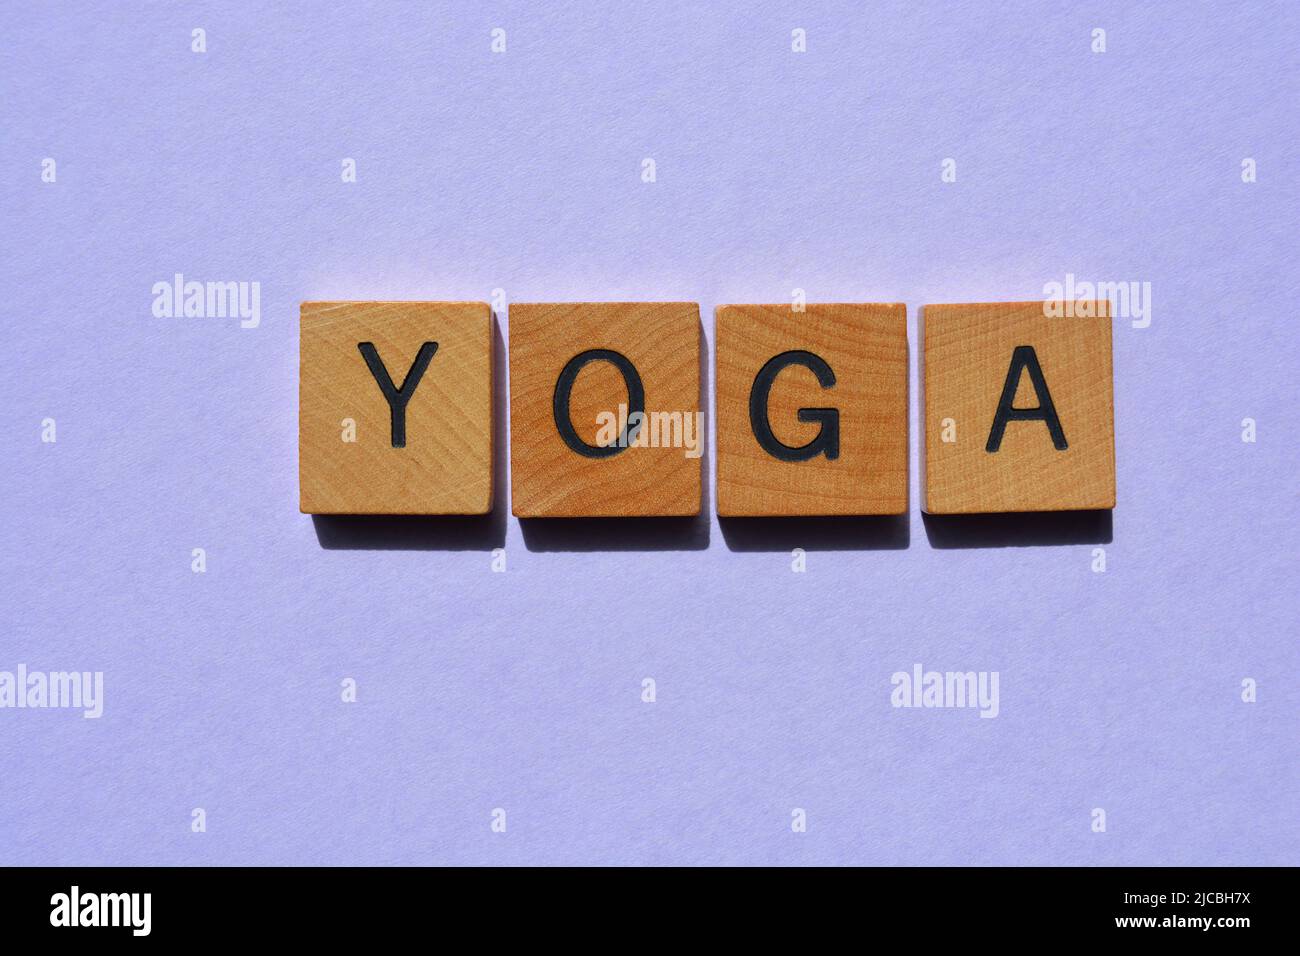 Yoga, word in wooden alphabet letters isolated on purple background Stock Photo